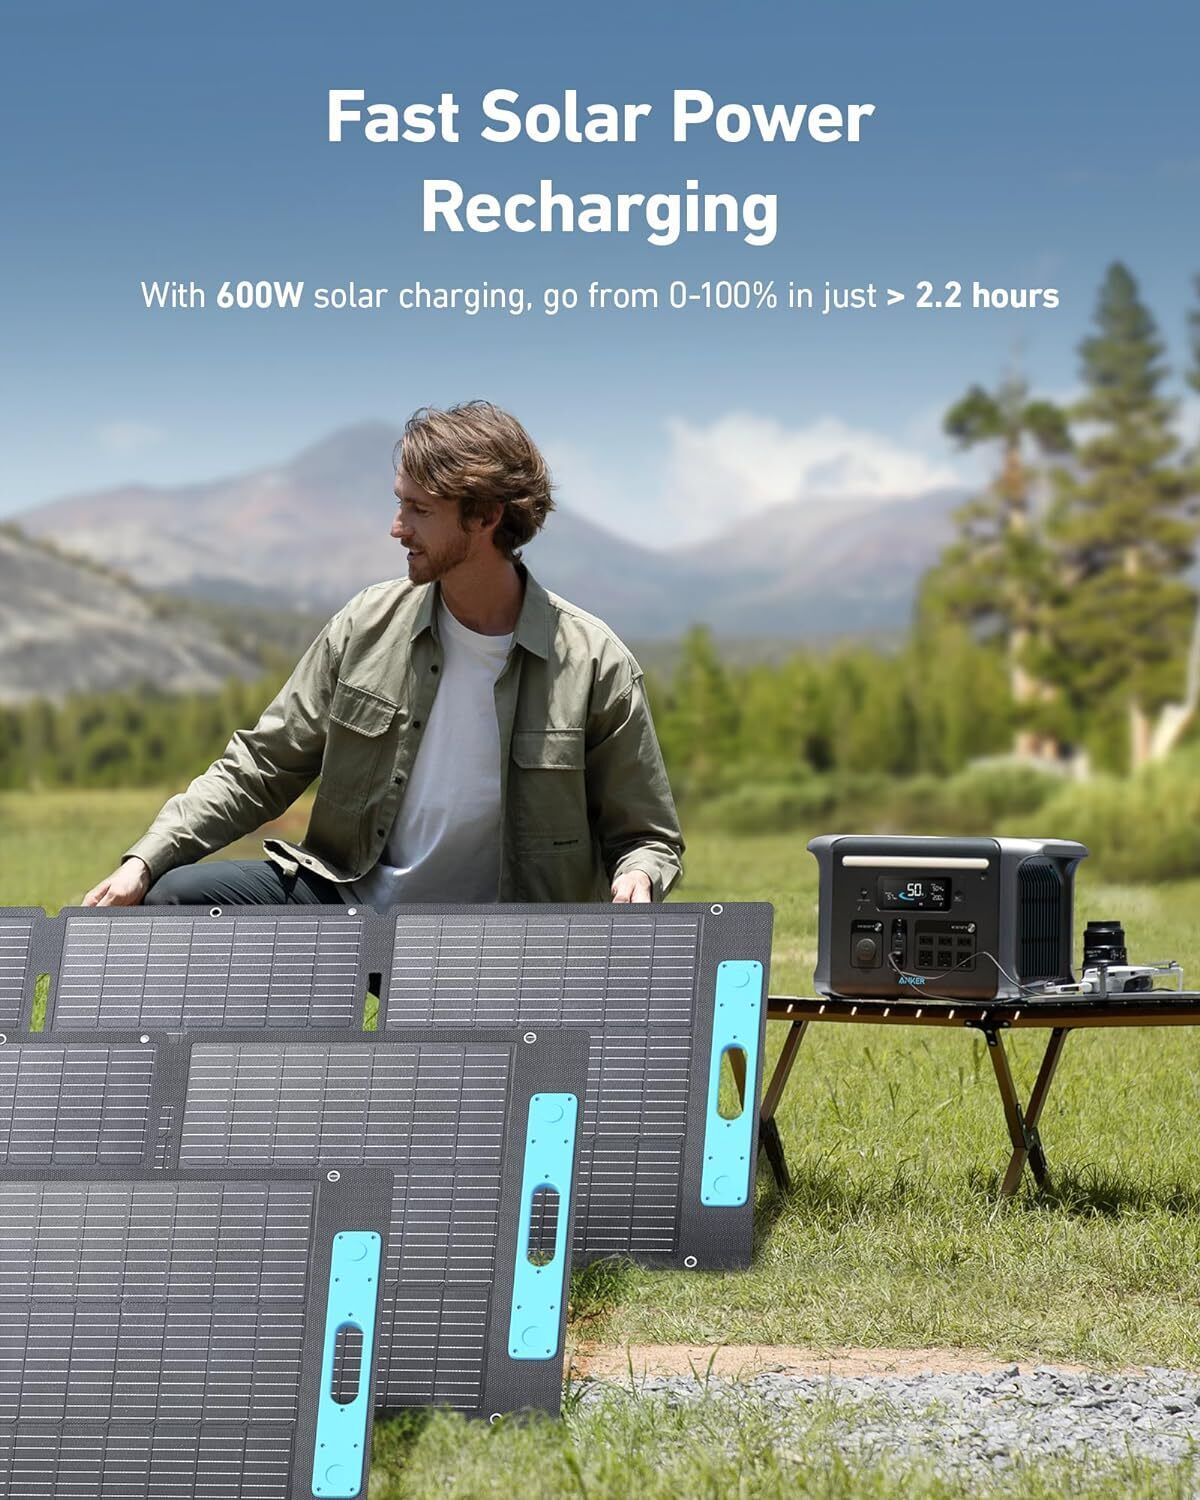 Anker Play Anker SOLIX F1200 Portable Power Station Solar Generator with 3x200W Solar Panel